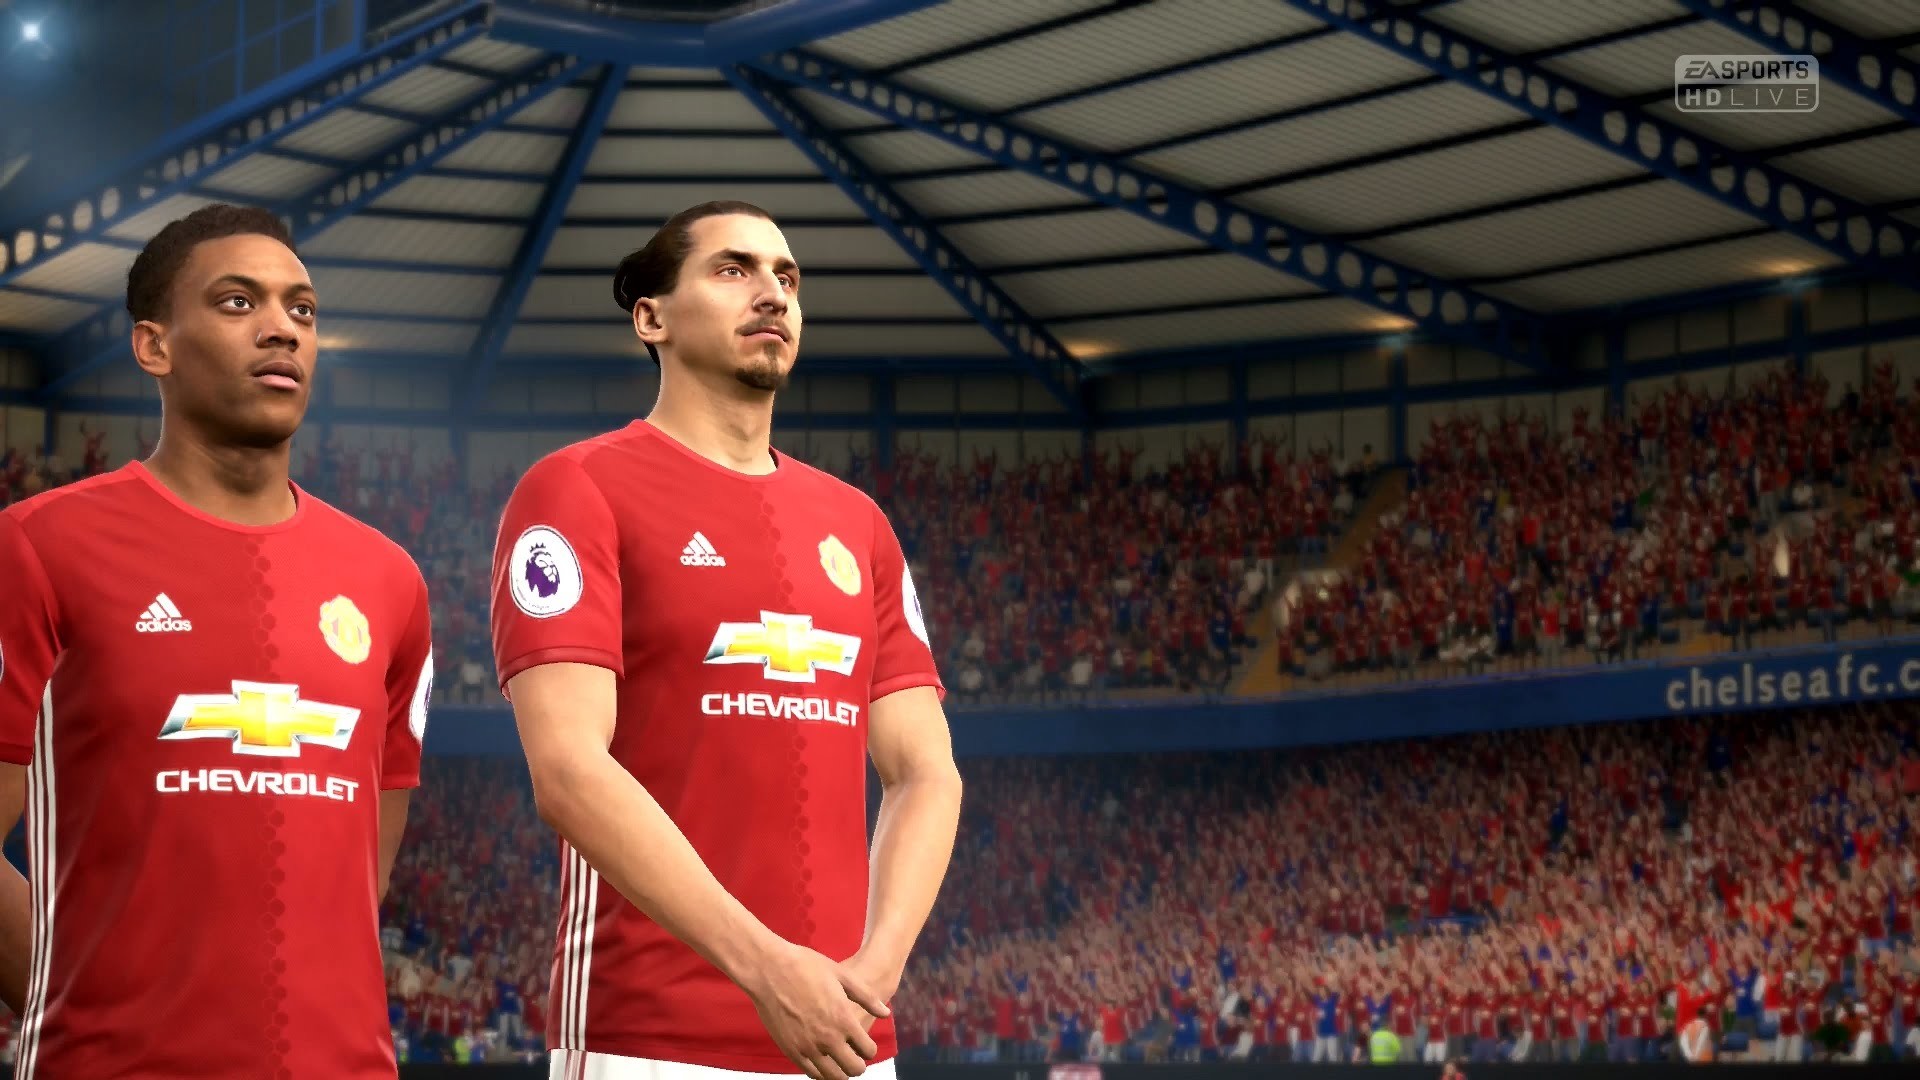 Fifa 17 - Manchester United Wallpapers 2018 19 - HD Wallpaper 